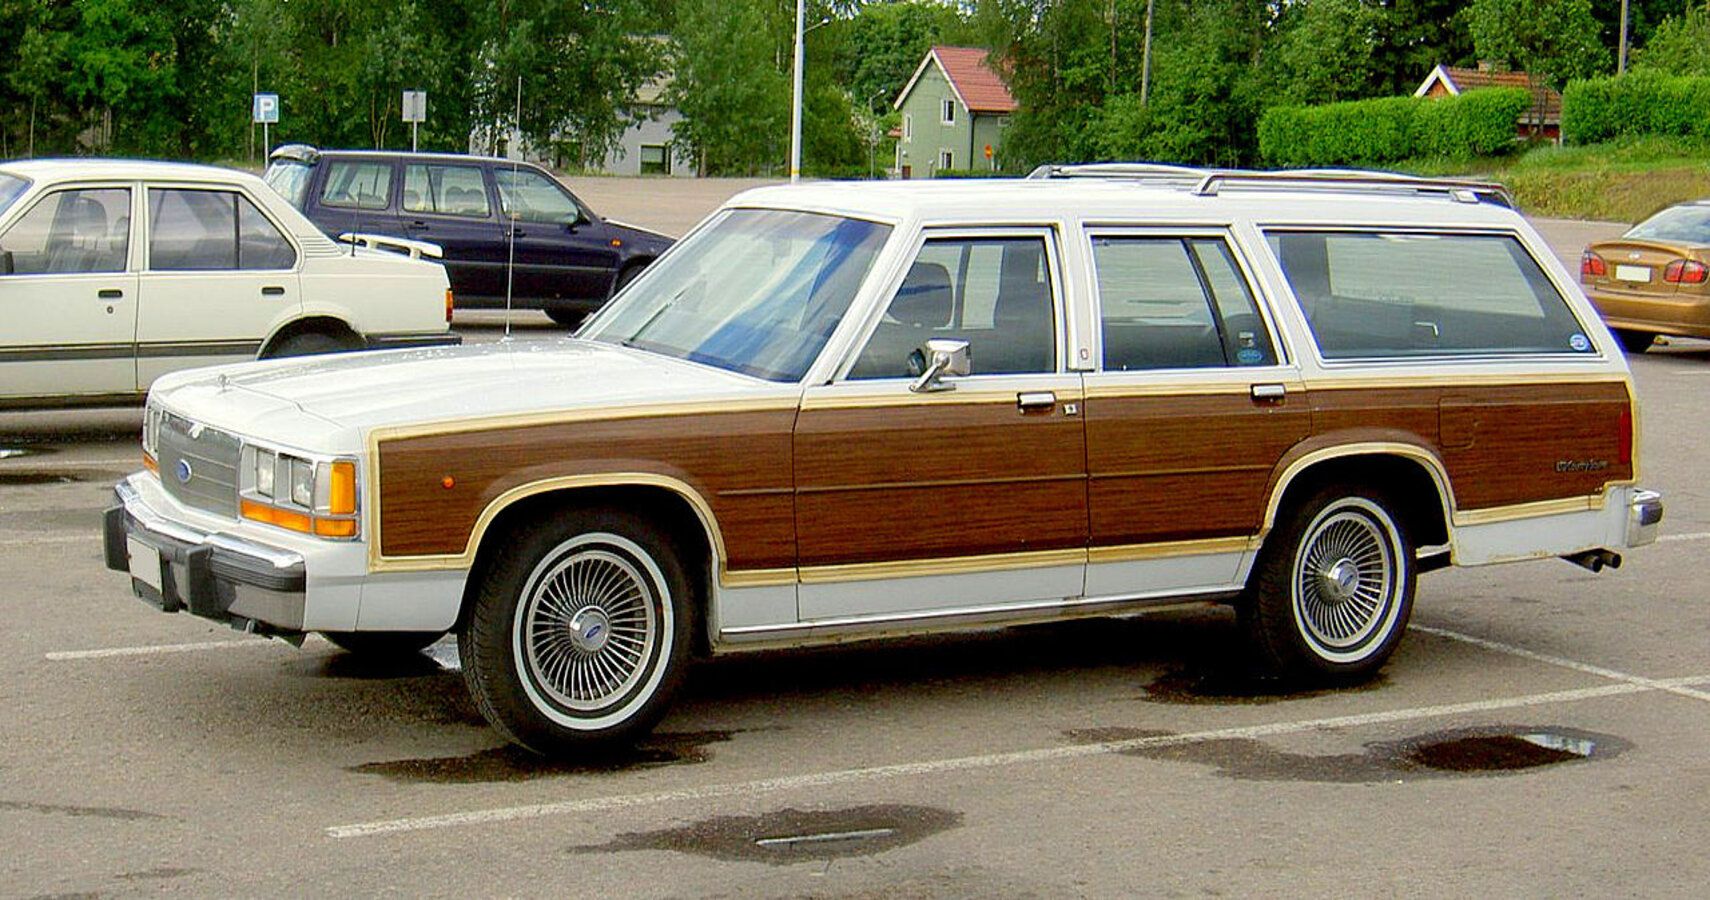 The Ford Country Squire is one of the most iconic cars of all time